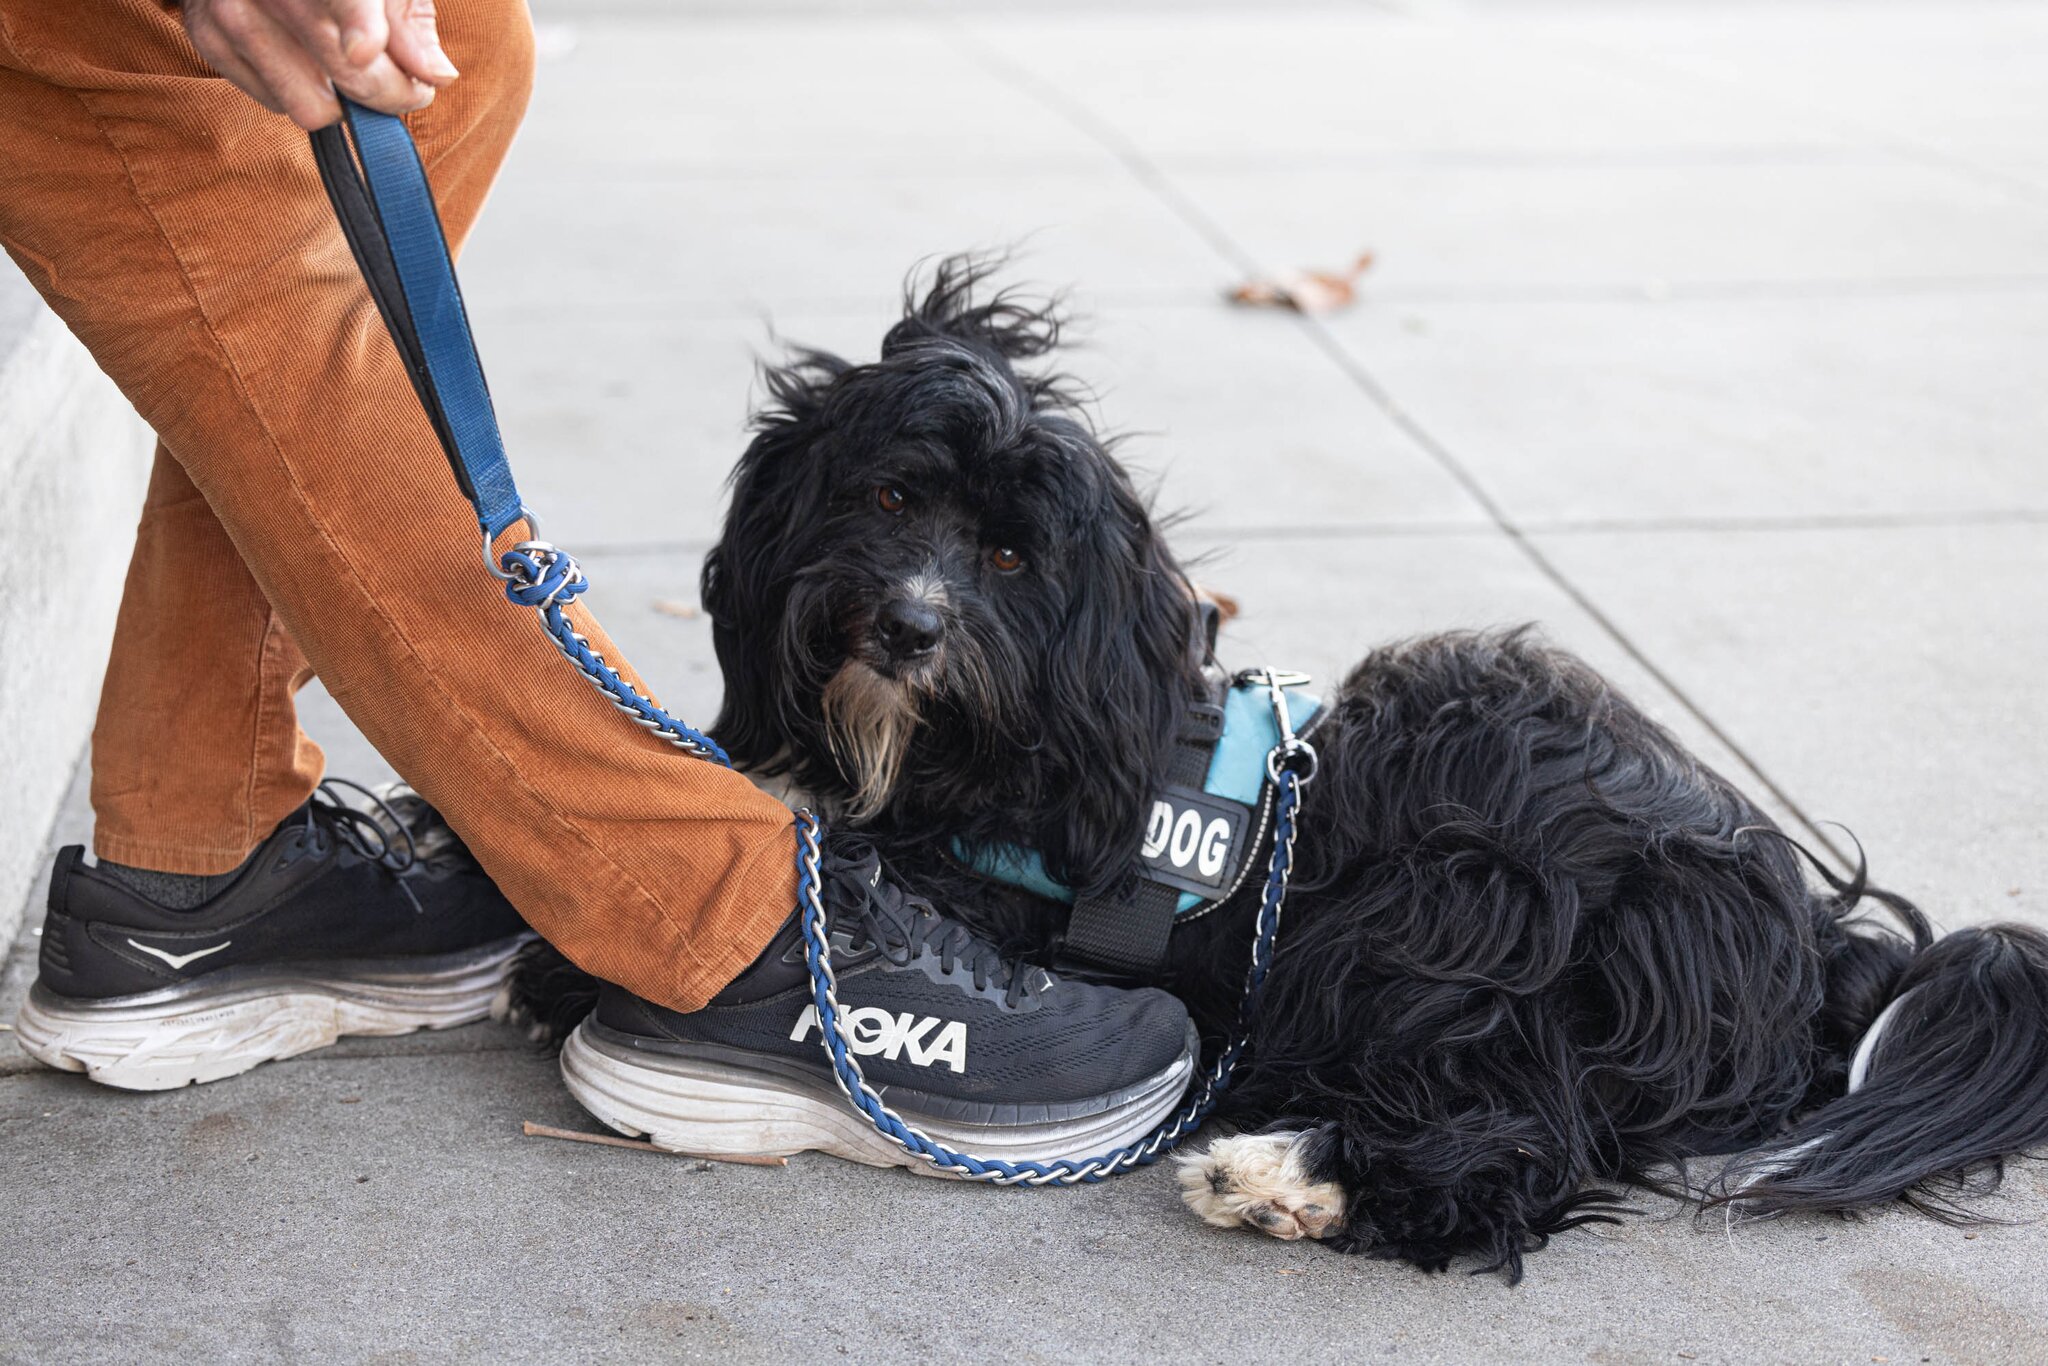 A small black dog lies on a sidewalk at the foot of its owner, who is wearing black sneakers and orange pants.